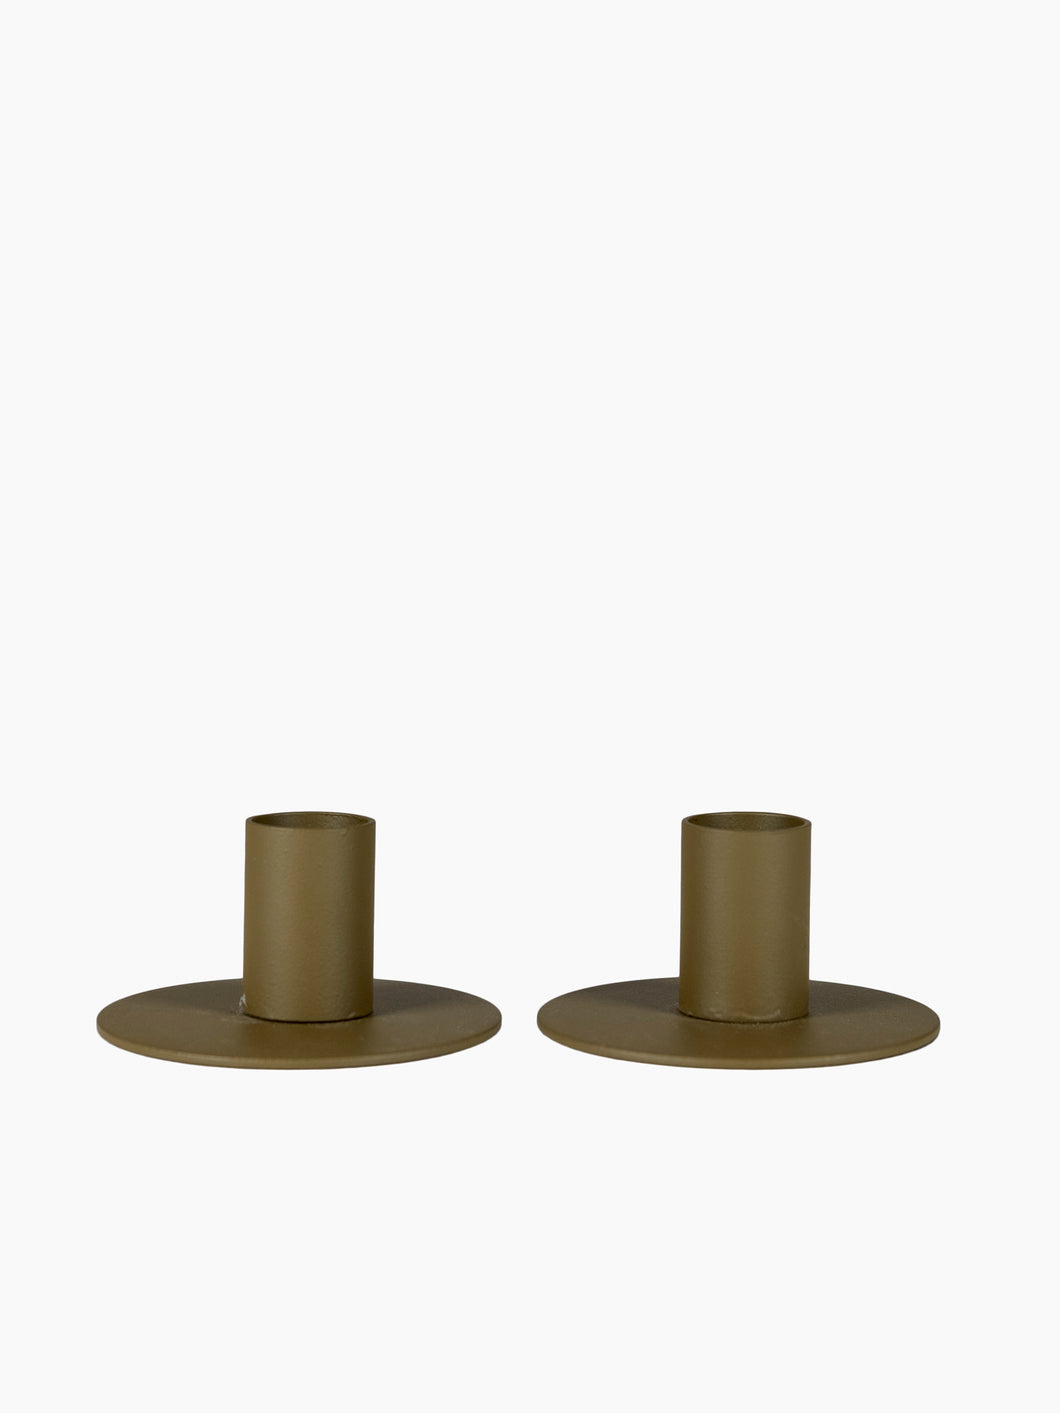 Olive Metal Candle Holders, Set of 2